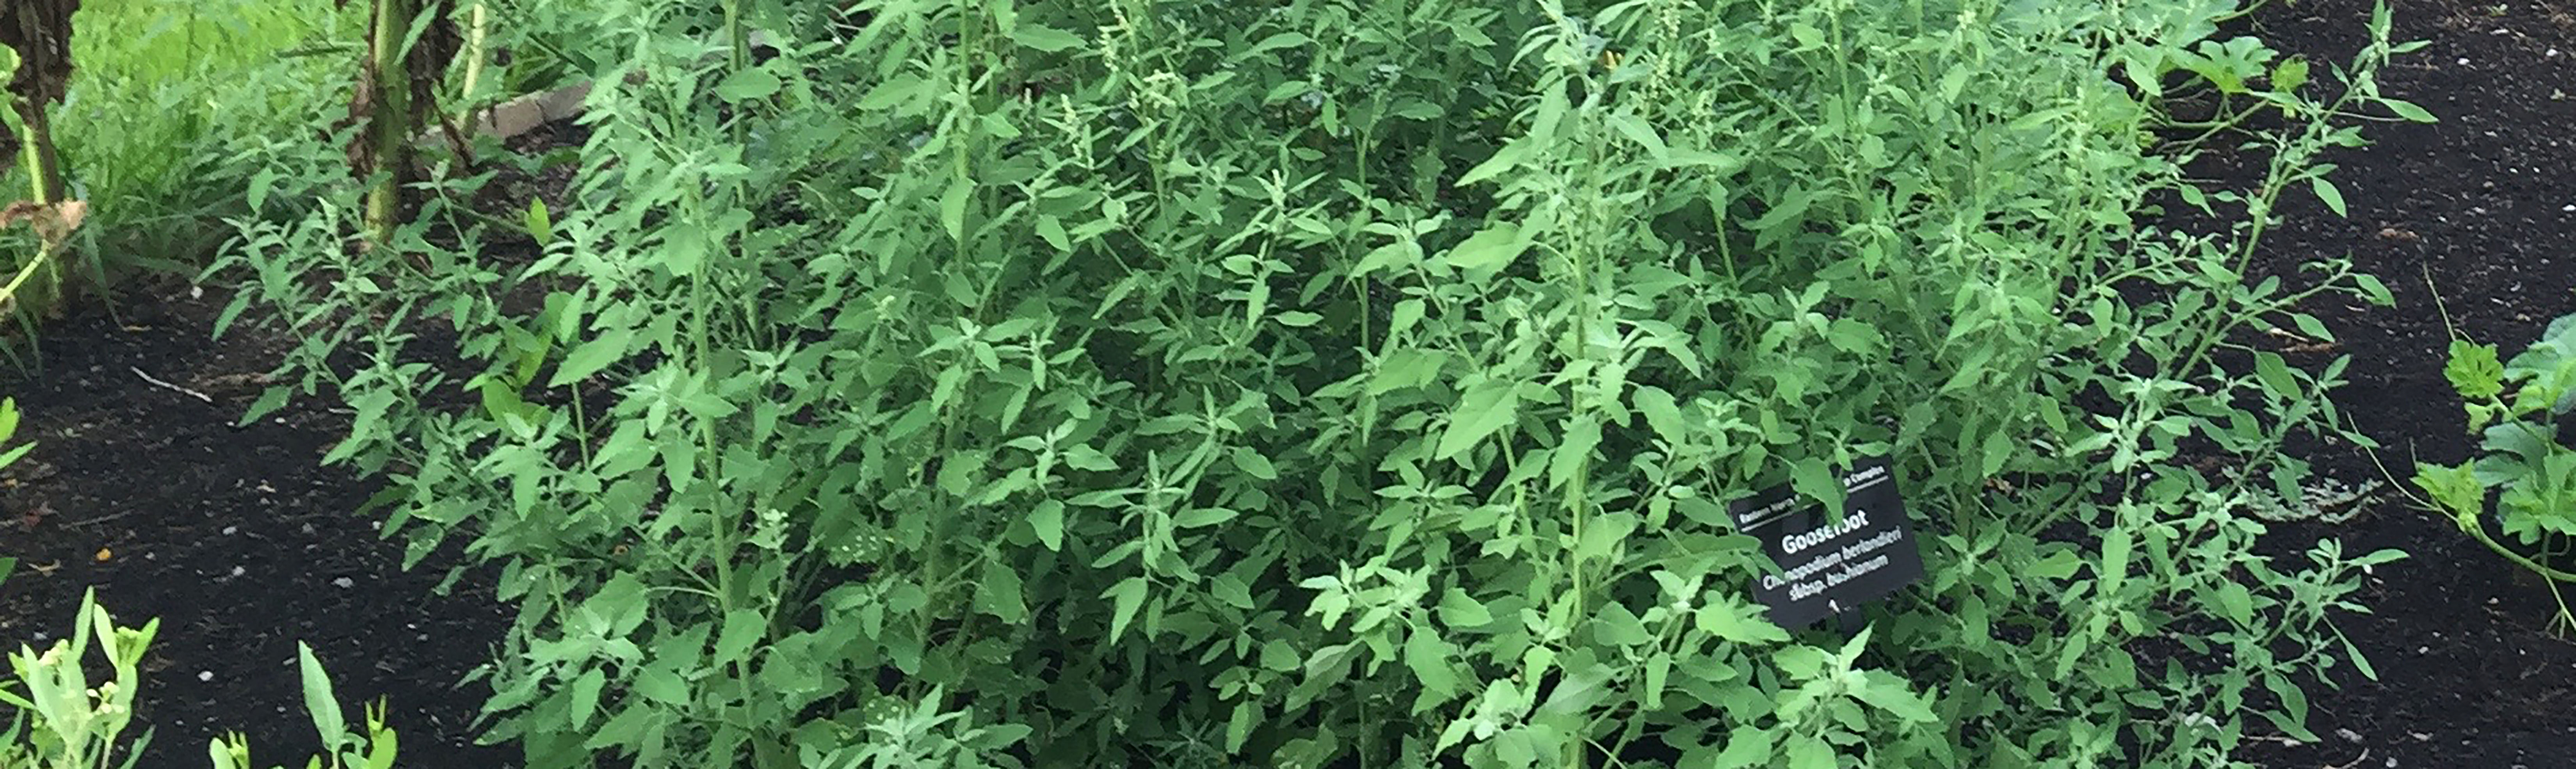 Goosefoot growing in the Plum Bayou Garden at Toltec Mounds Archeological State Park. Photograph by Elizabeth Horton, 2016.